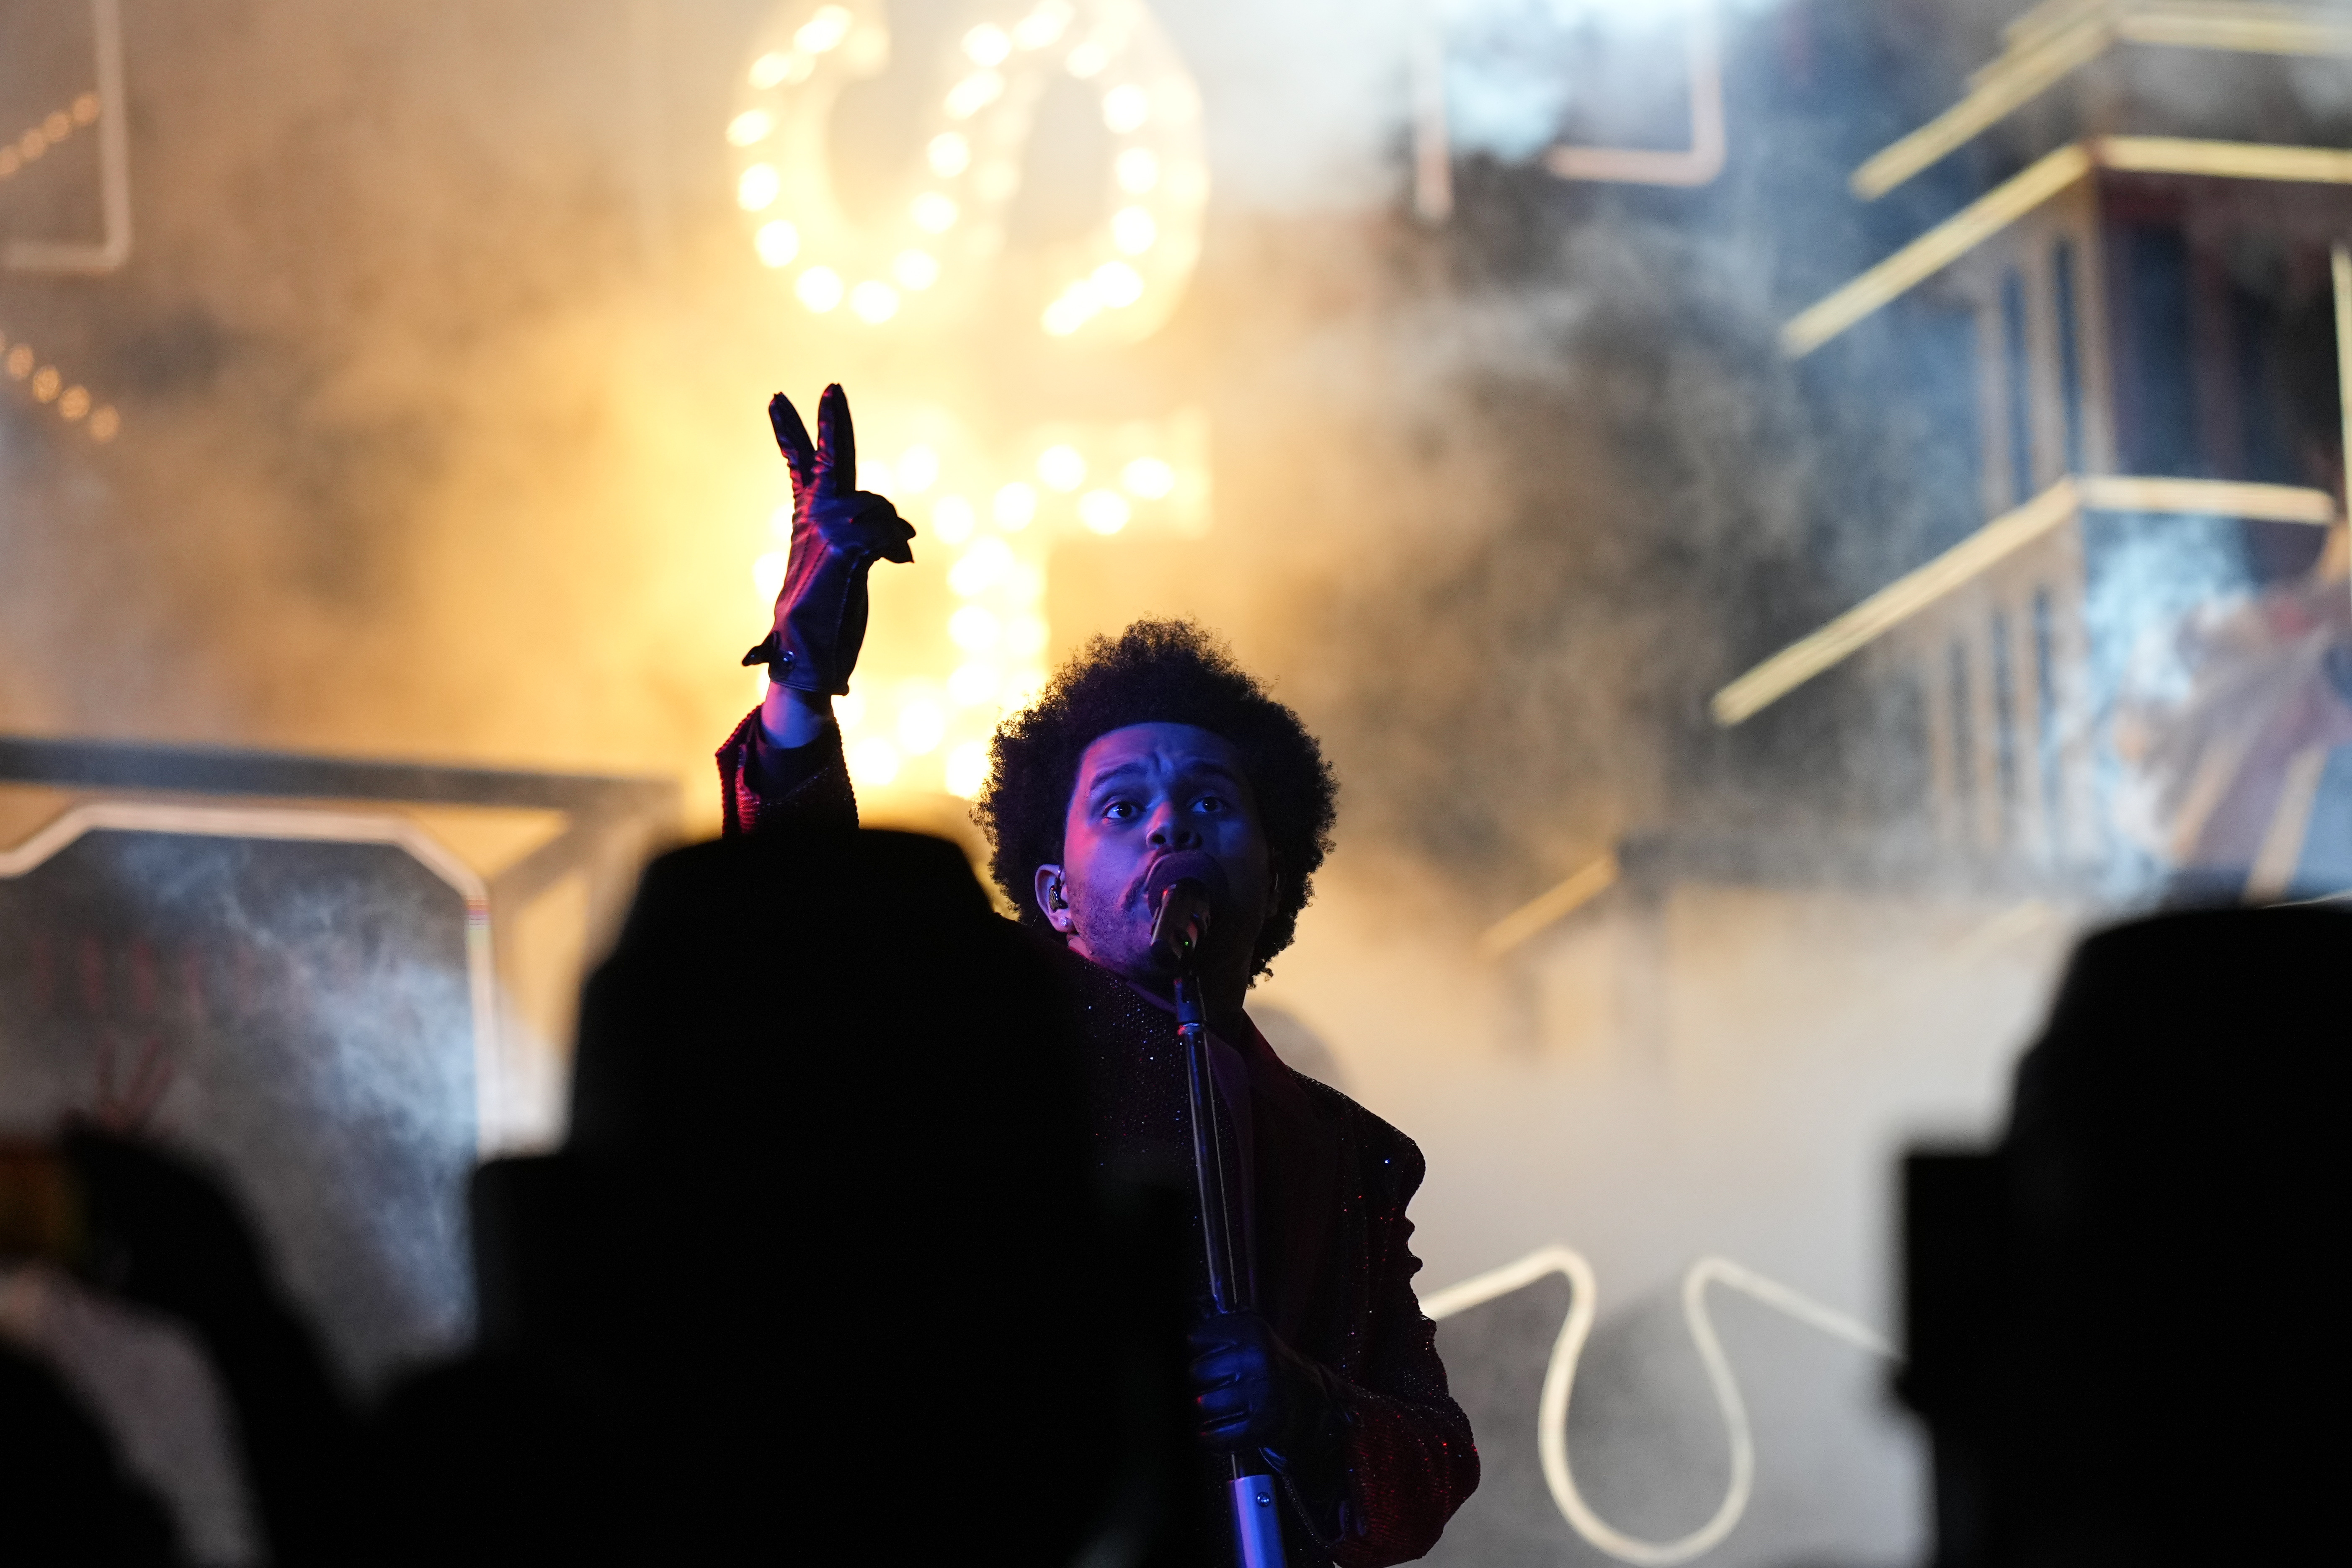 The Weeknd's disorienting Super Bowl halftime show in Tampa felt right